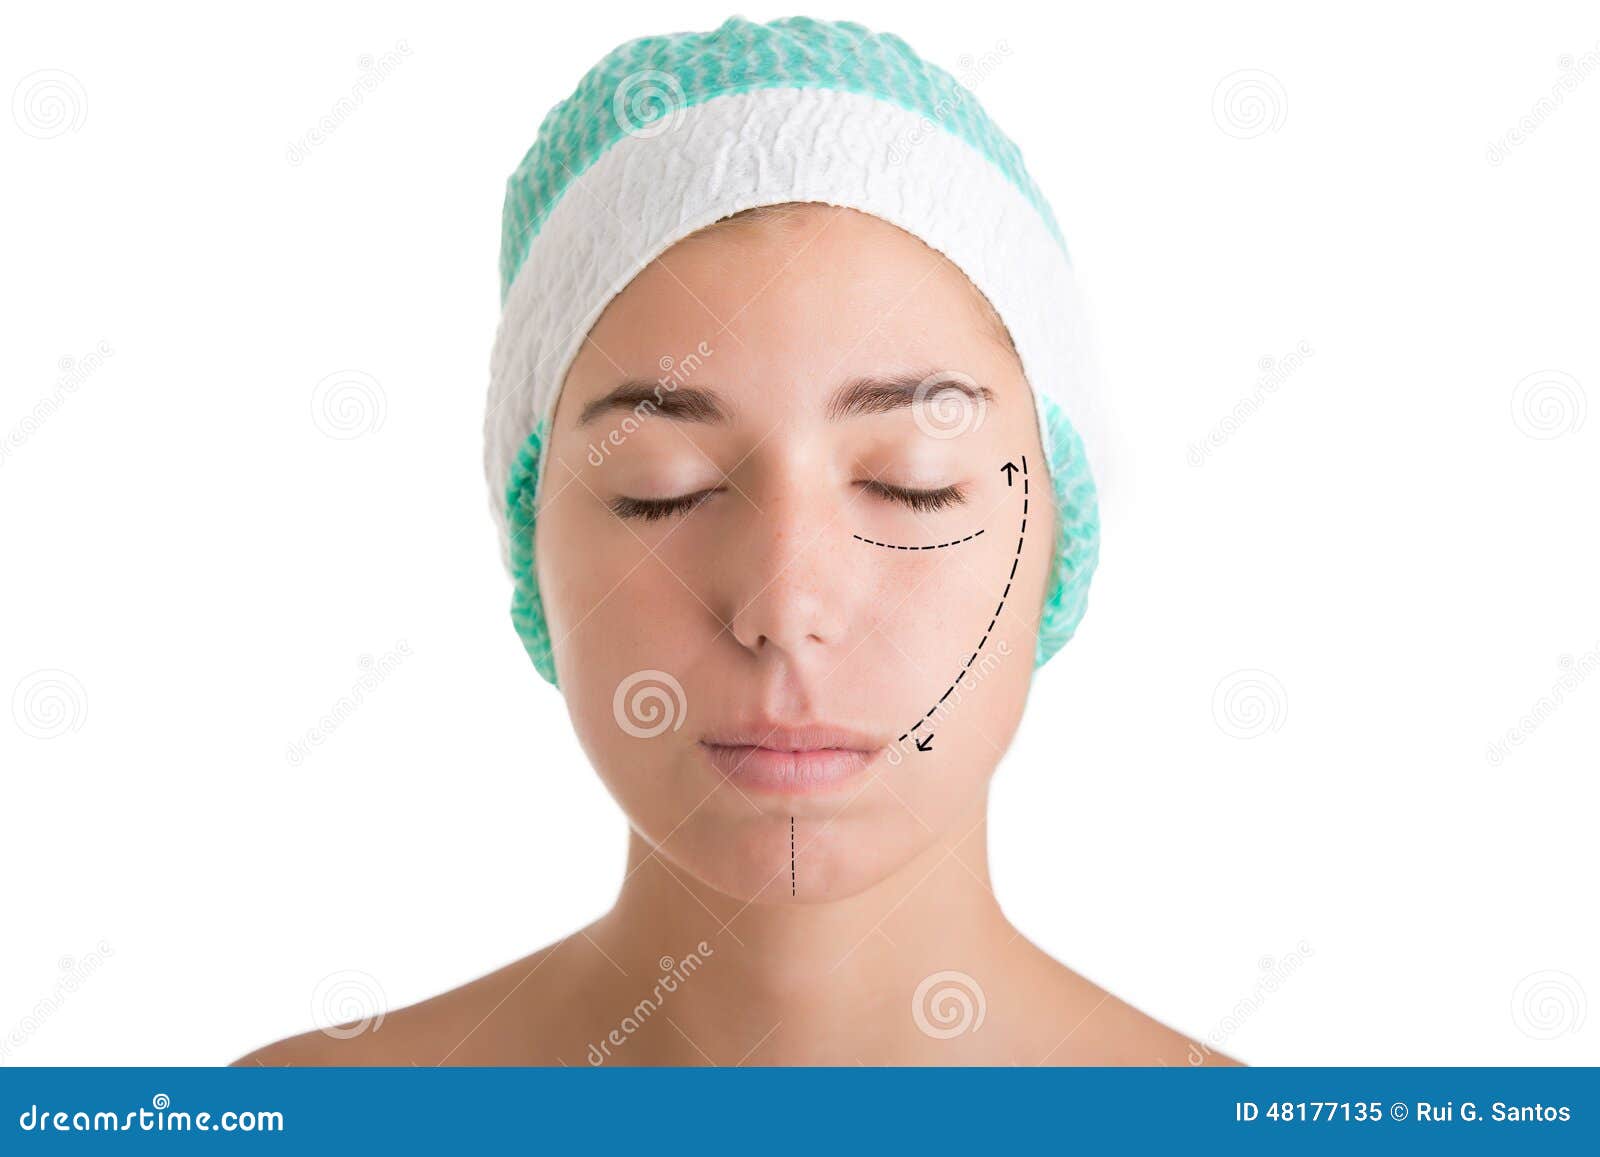 surgeon-perfect-face-template-female